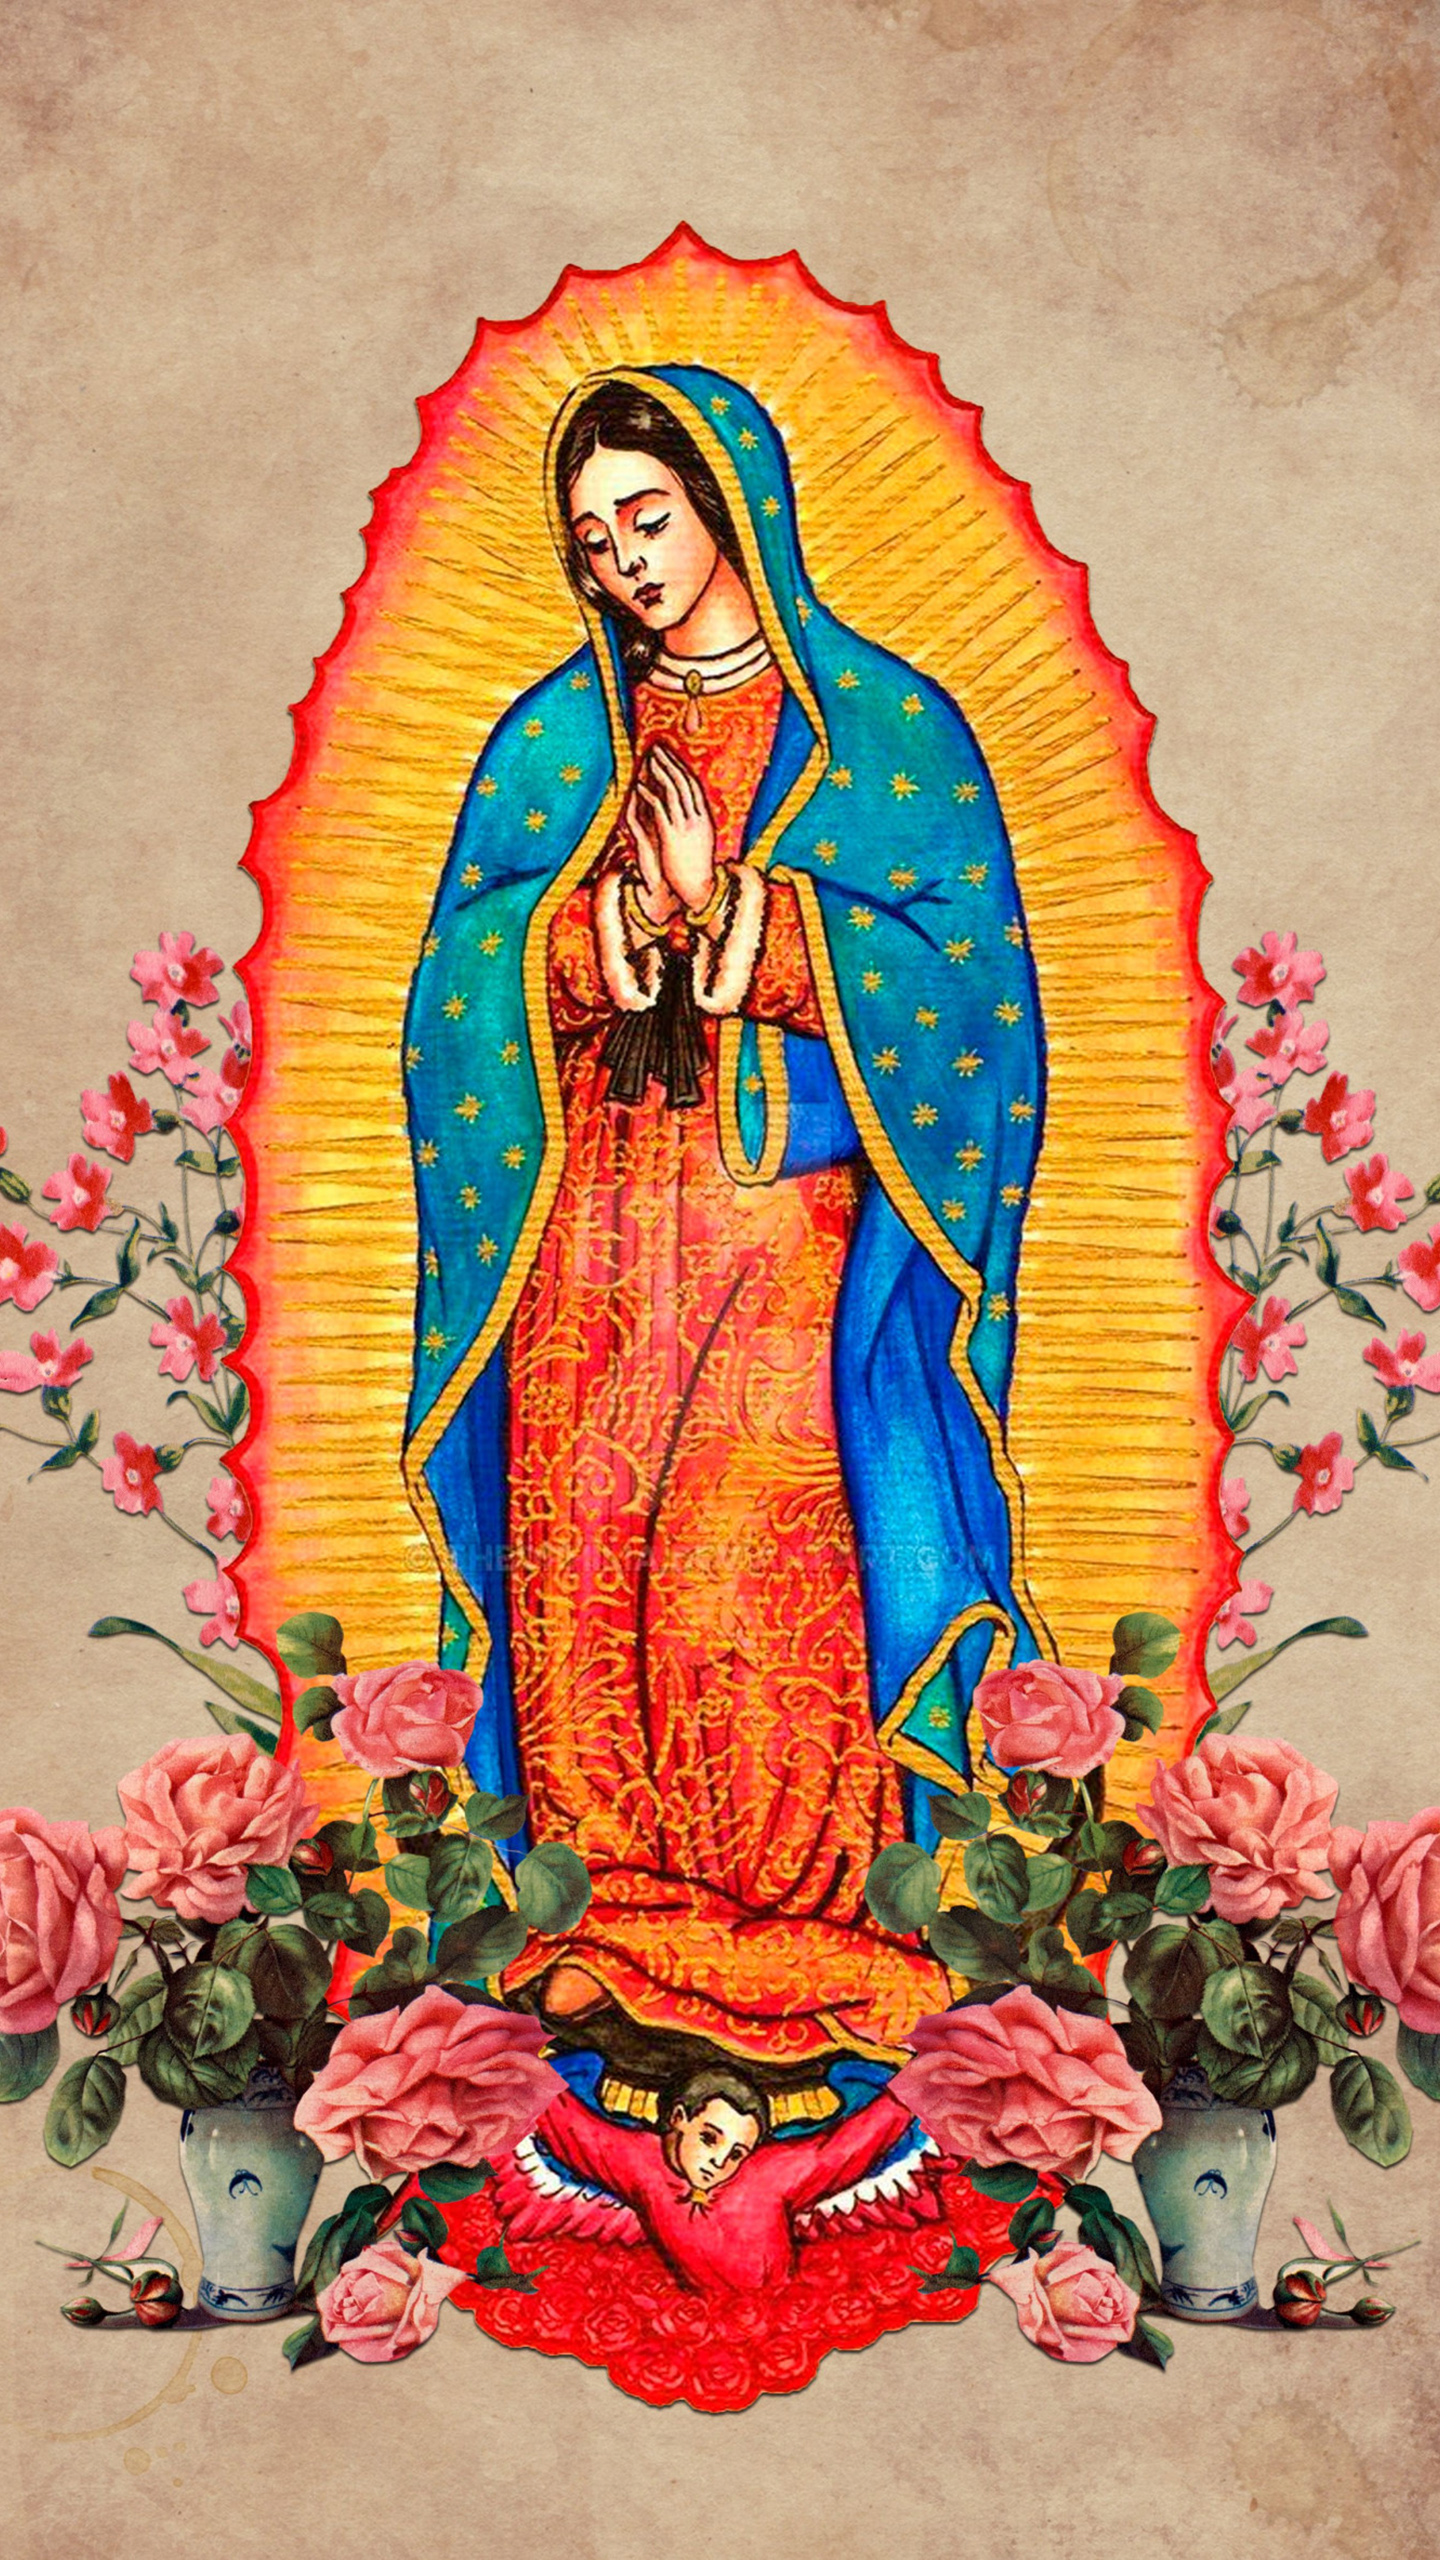 Icon Lady Of Guadalupe Background Wallpaper For Phone Pictures Of Virgen  De Guadalupe Background Image And Wallpaper for Free Download